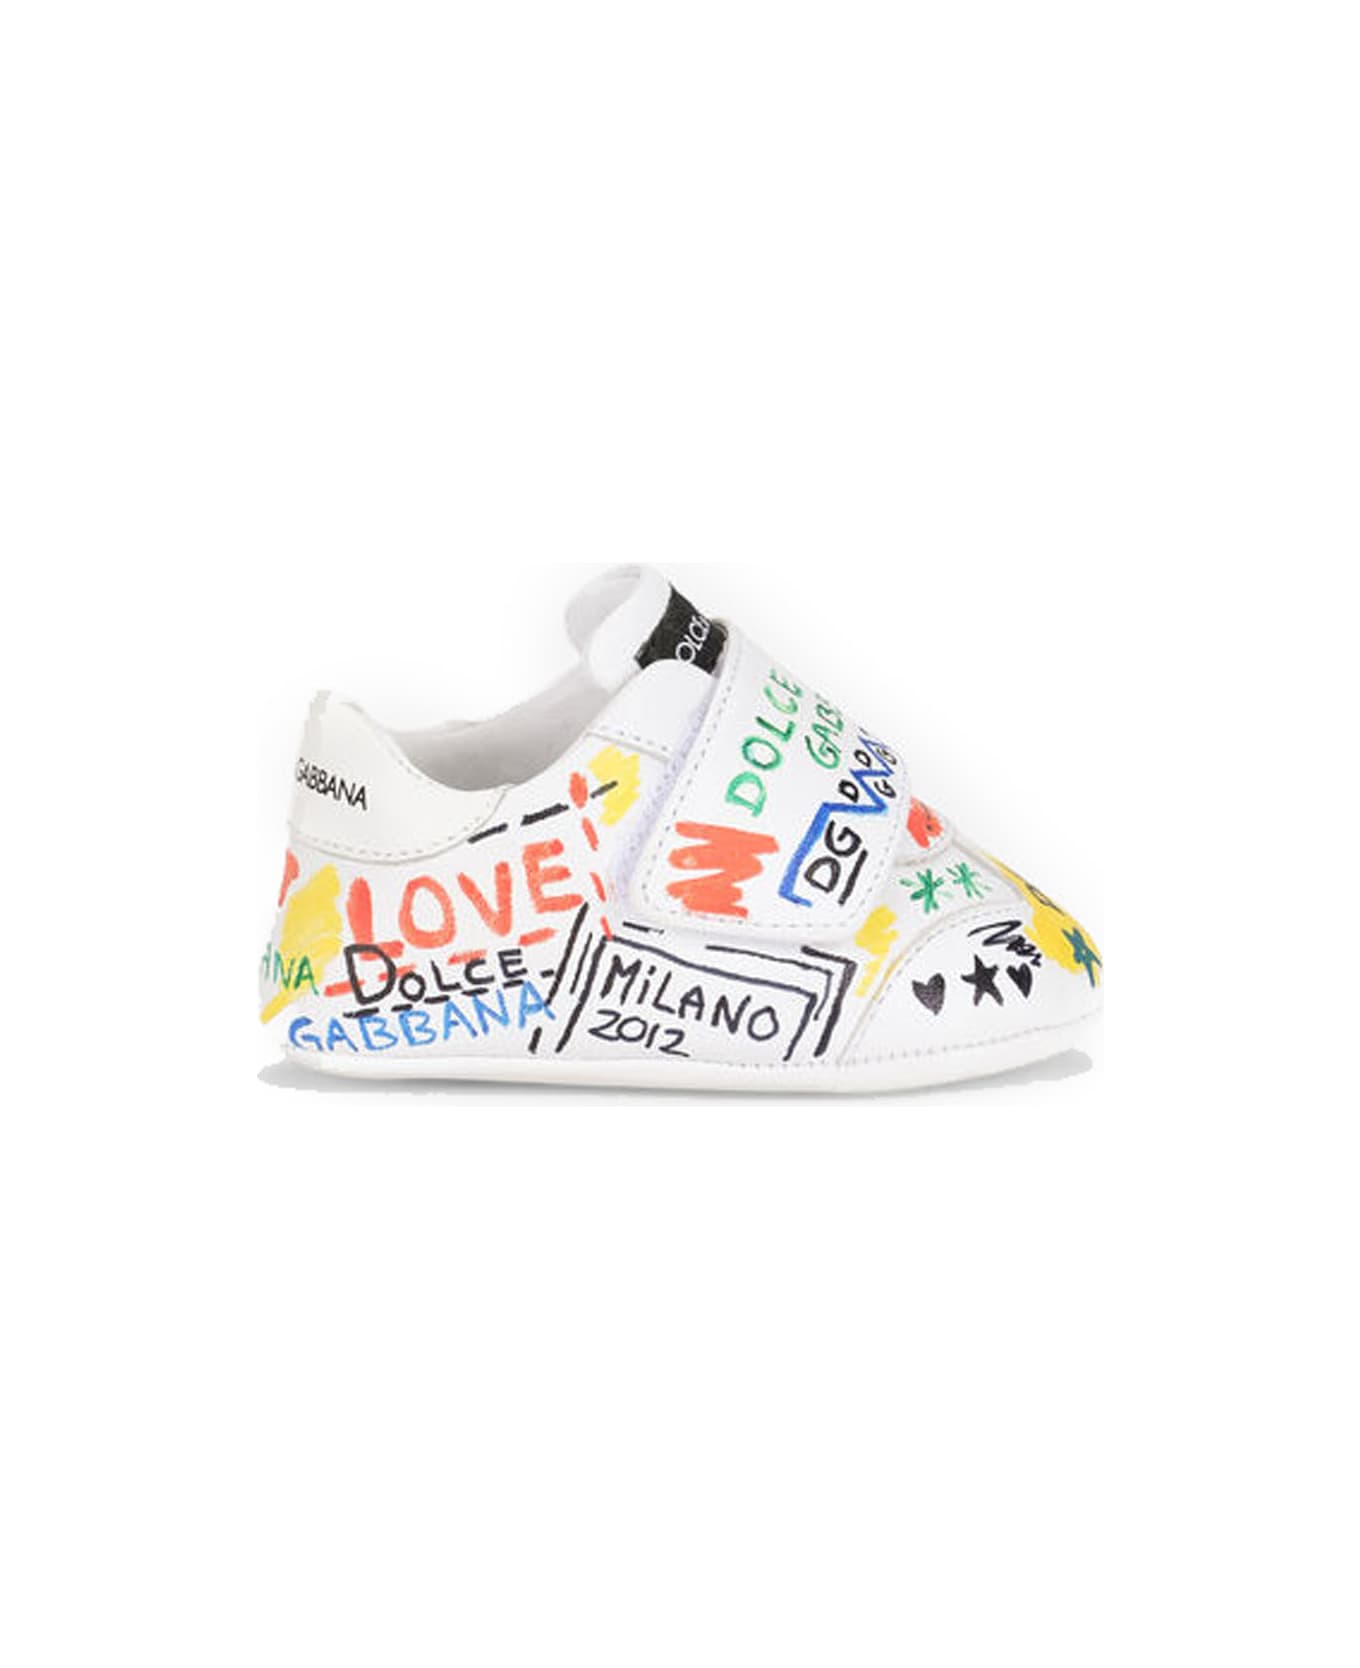 Dolce & Gabbana Strap Sneakers With Written Print - Multicolor